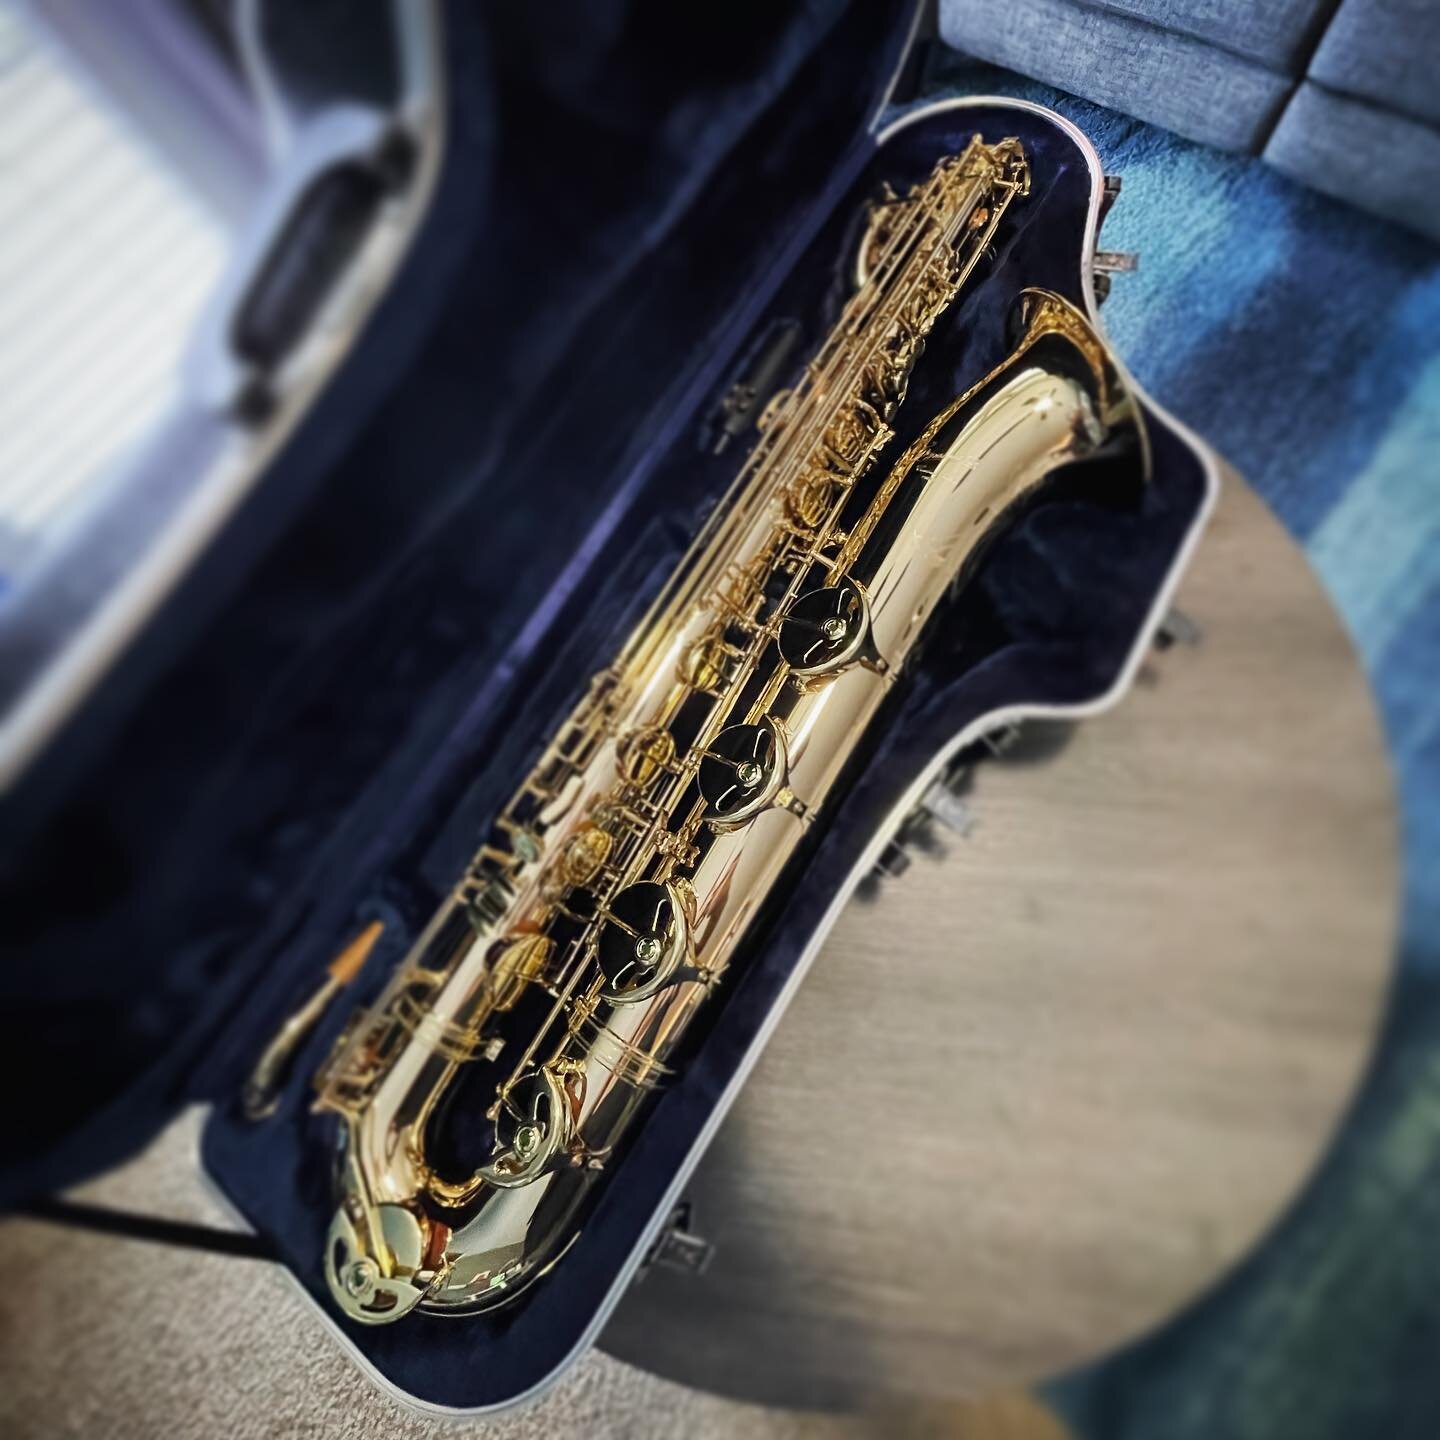 Hey gang!! I got a new Bari Sax from @pmauriatnamerica @pmauriatmusic Check out the unboxing video over on my tiktok (MusicByPedro).